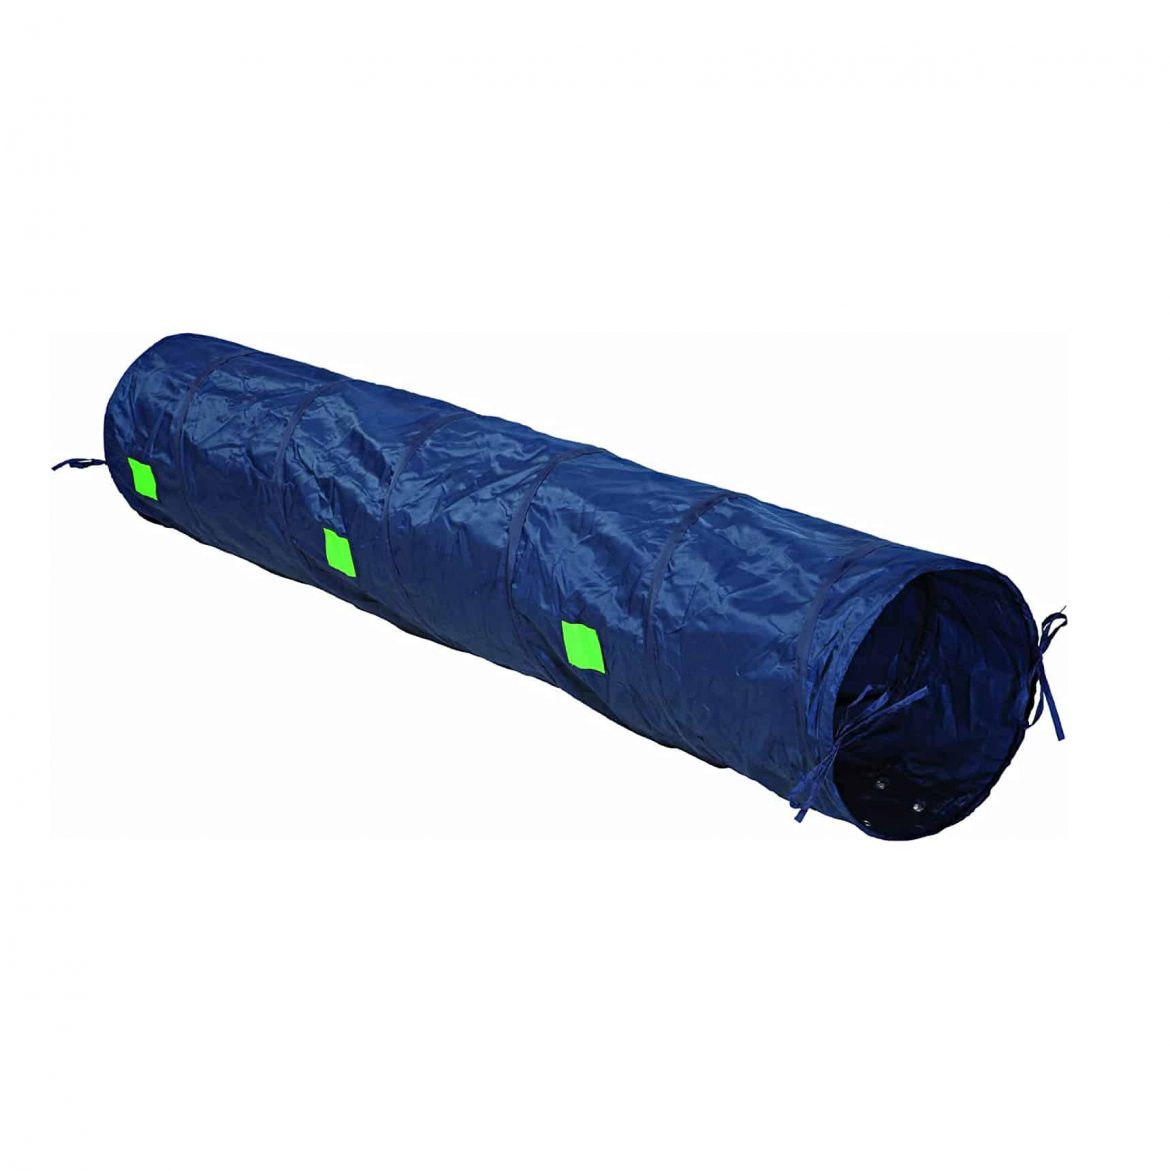 Top 10 Best Dog Agility Tunnels in 2021 Reviews | Buyer's Guide